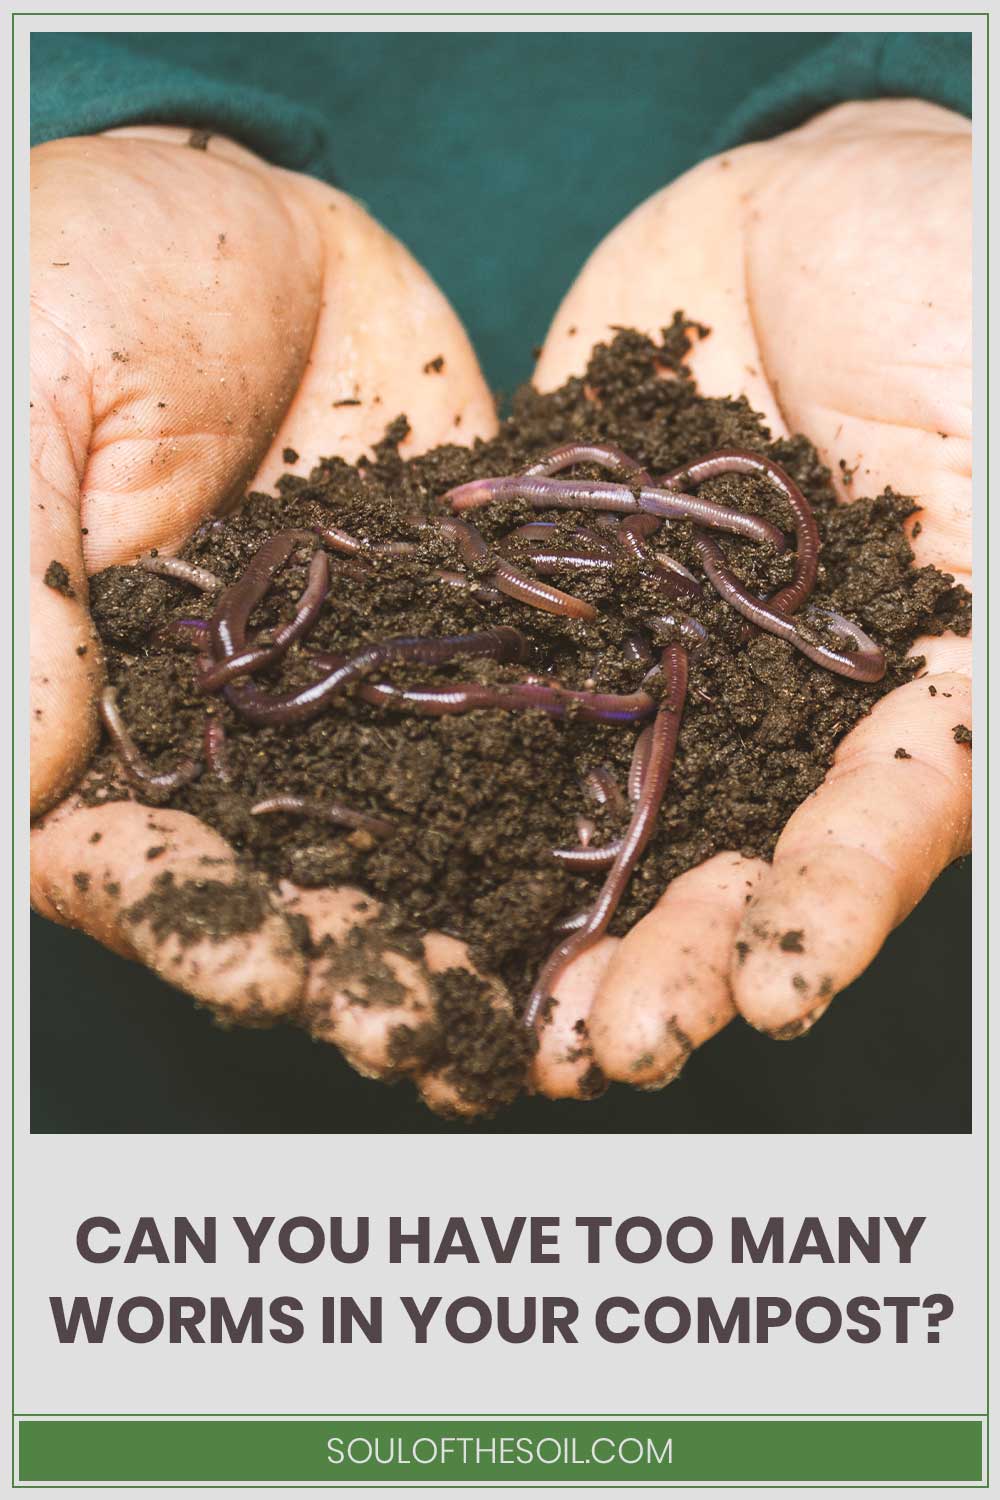 Compost with worms in a persons palms - Can You Have Too Many Worms In Your Compost?